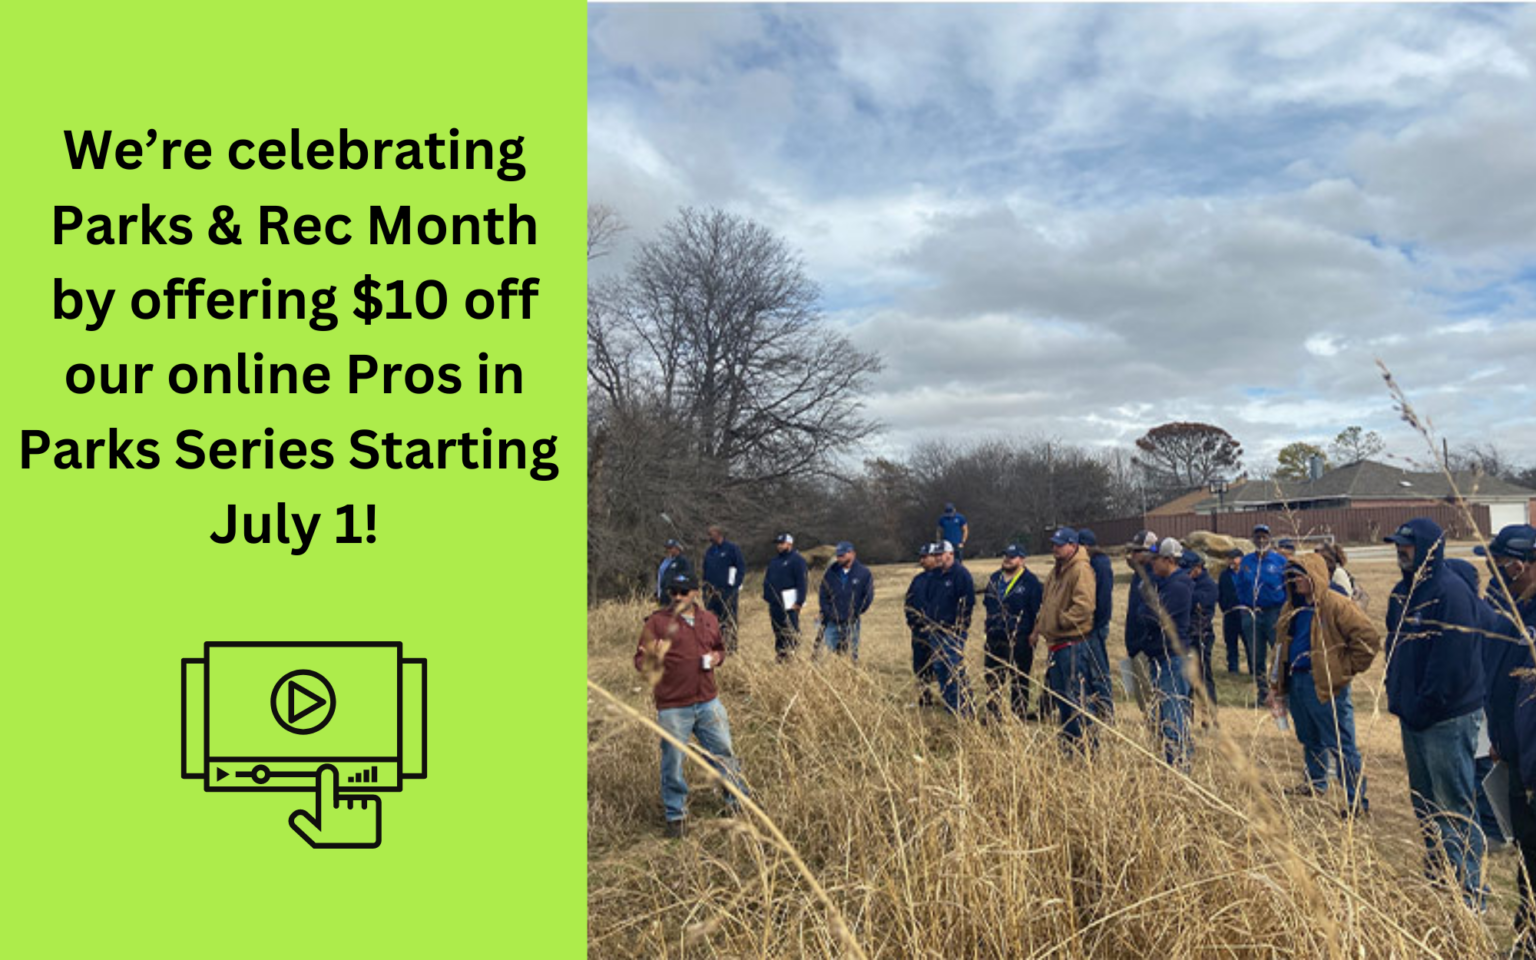 Online Pros in Parks July Promotion. We're celebrating Parks & Rec Month by offering $10 off our online Pros in Parks Series Starting July 1. Click to view the Pros in Park Series on AgriLife Learn.